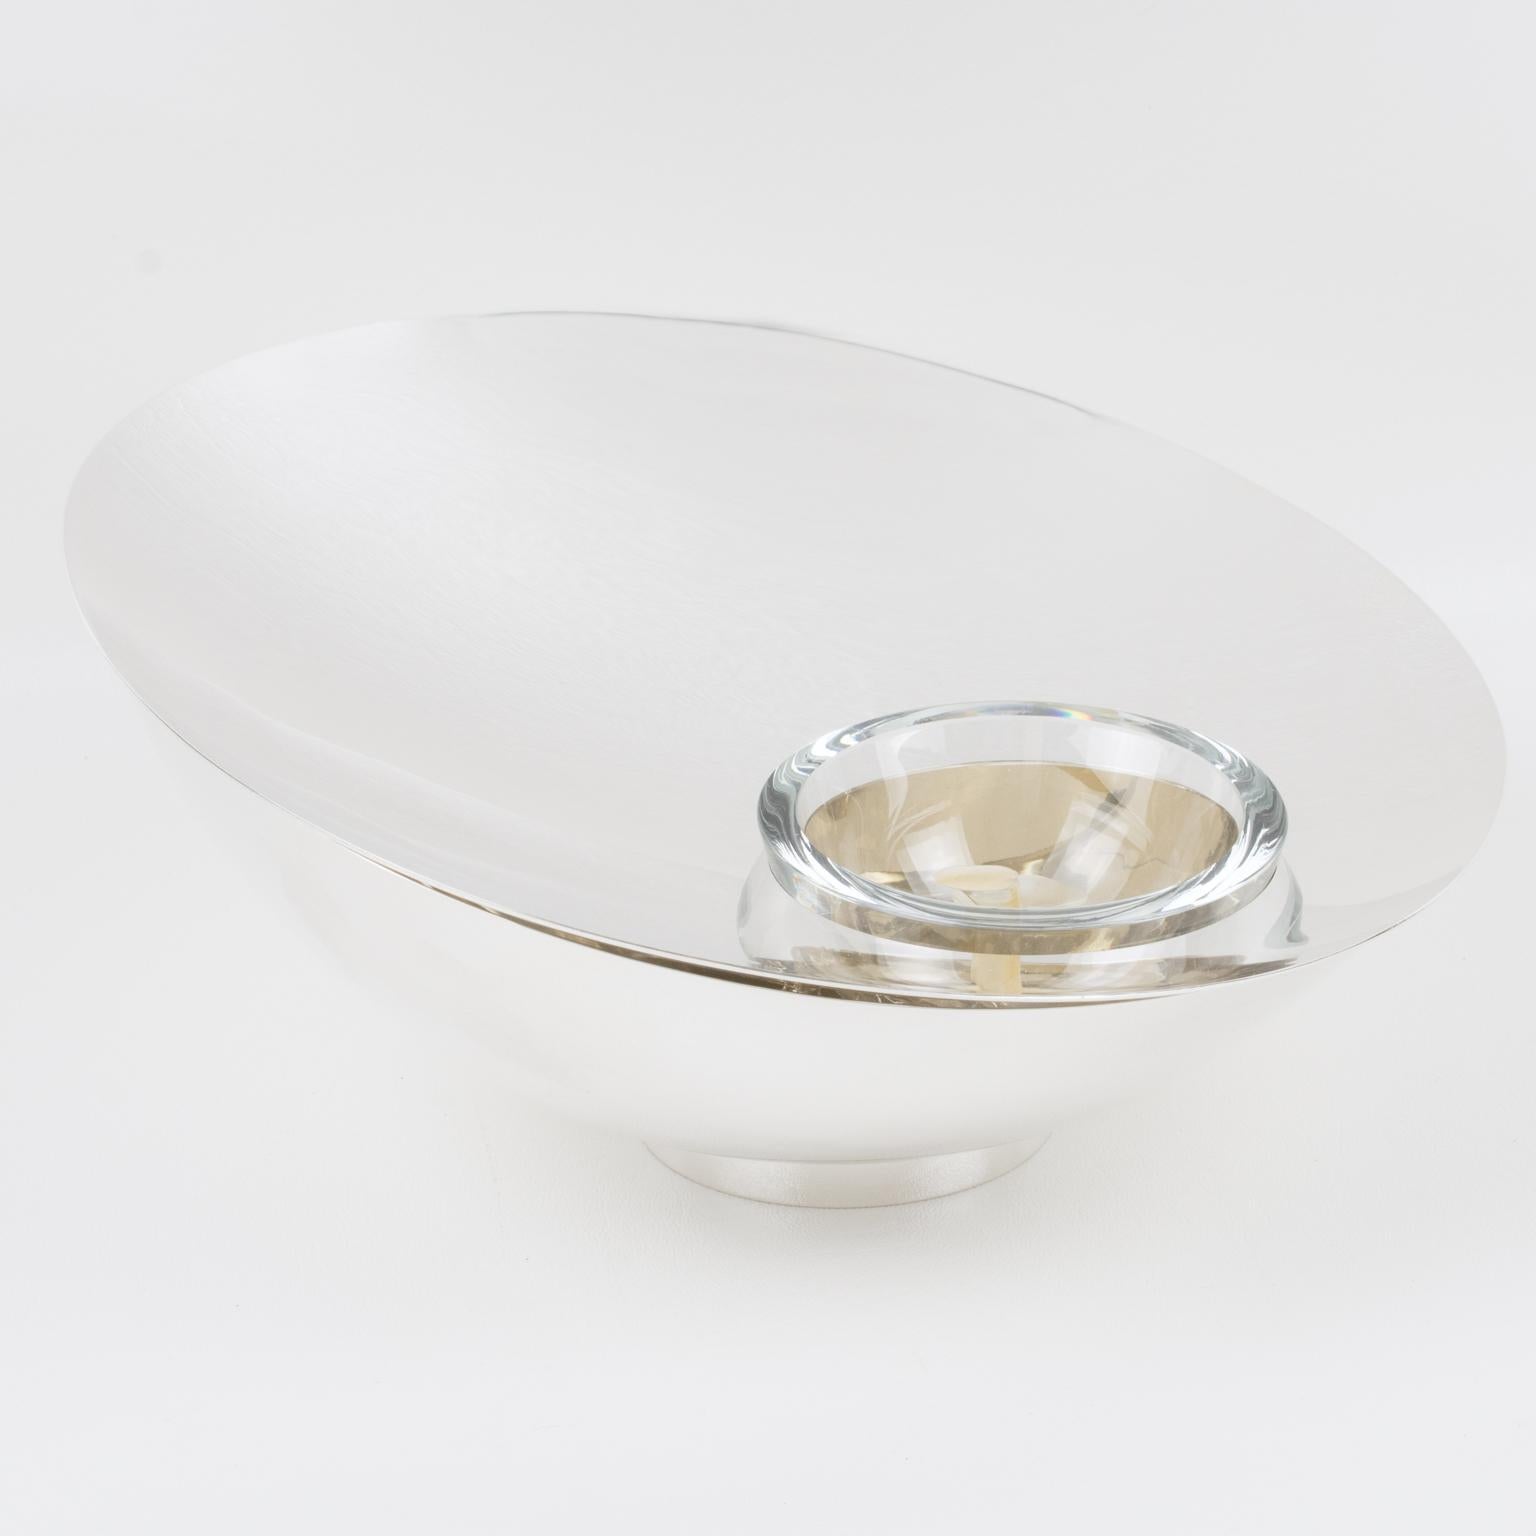 Silver Plate and Crystal Caviar Bowl Dish by Nan Swid for SwidPowell 3